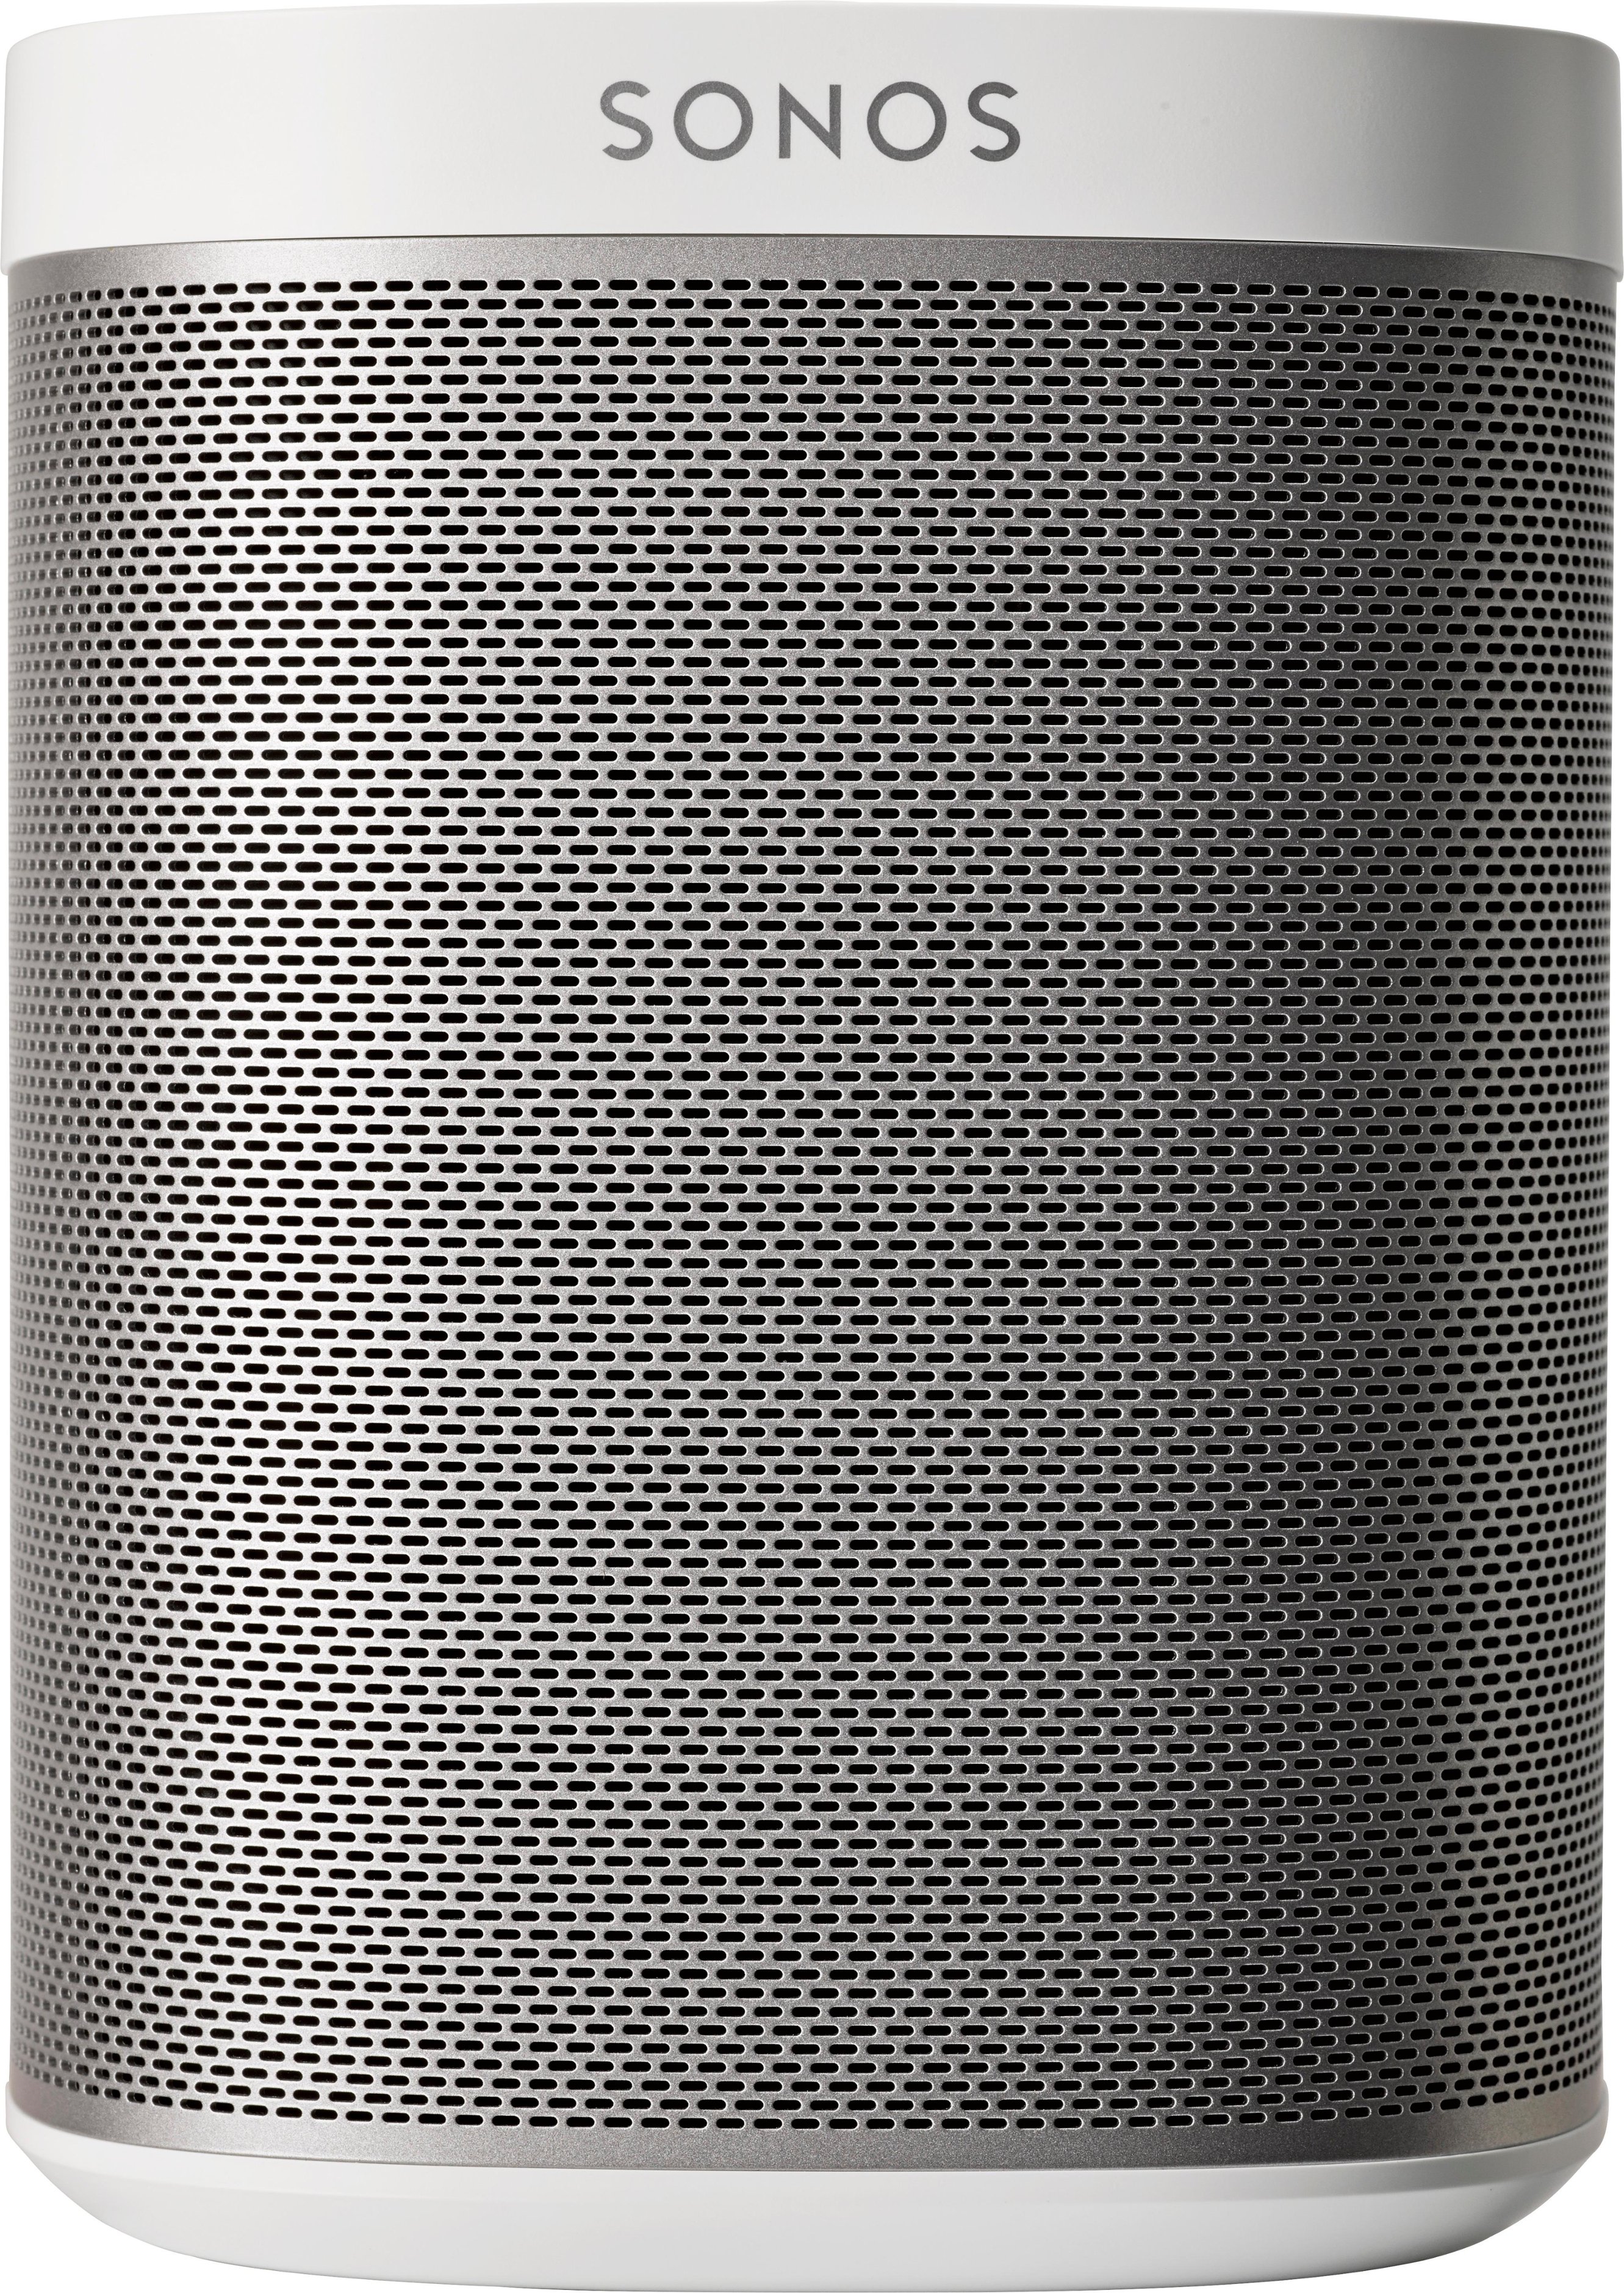 dissipation afstemning Kriger Sonos Play:1 Wireless Smart Speaker for Streaming Music White PLAY1US1 -  Best Buy